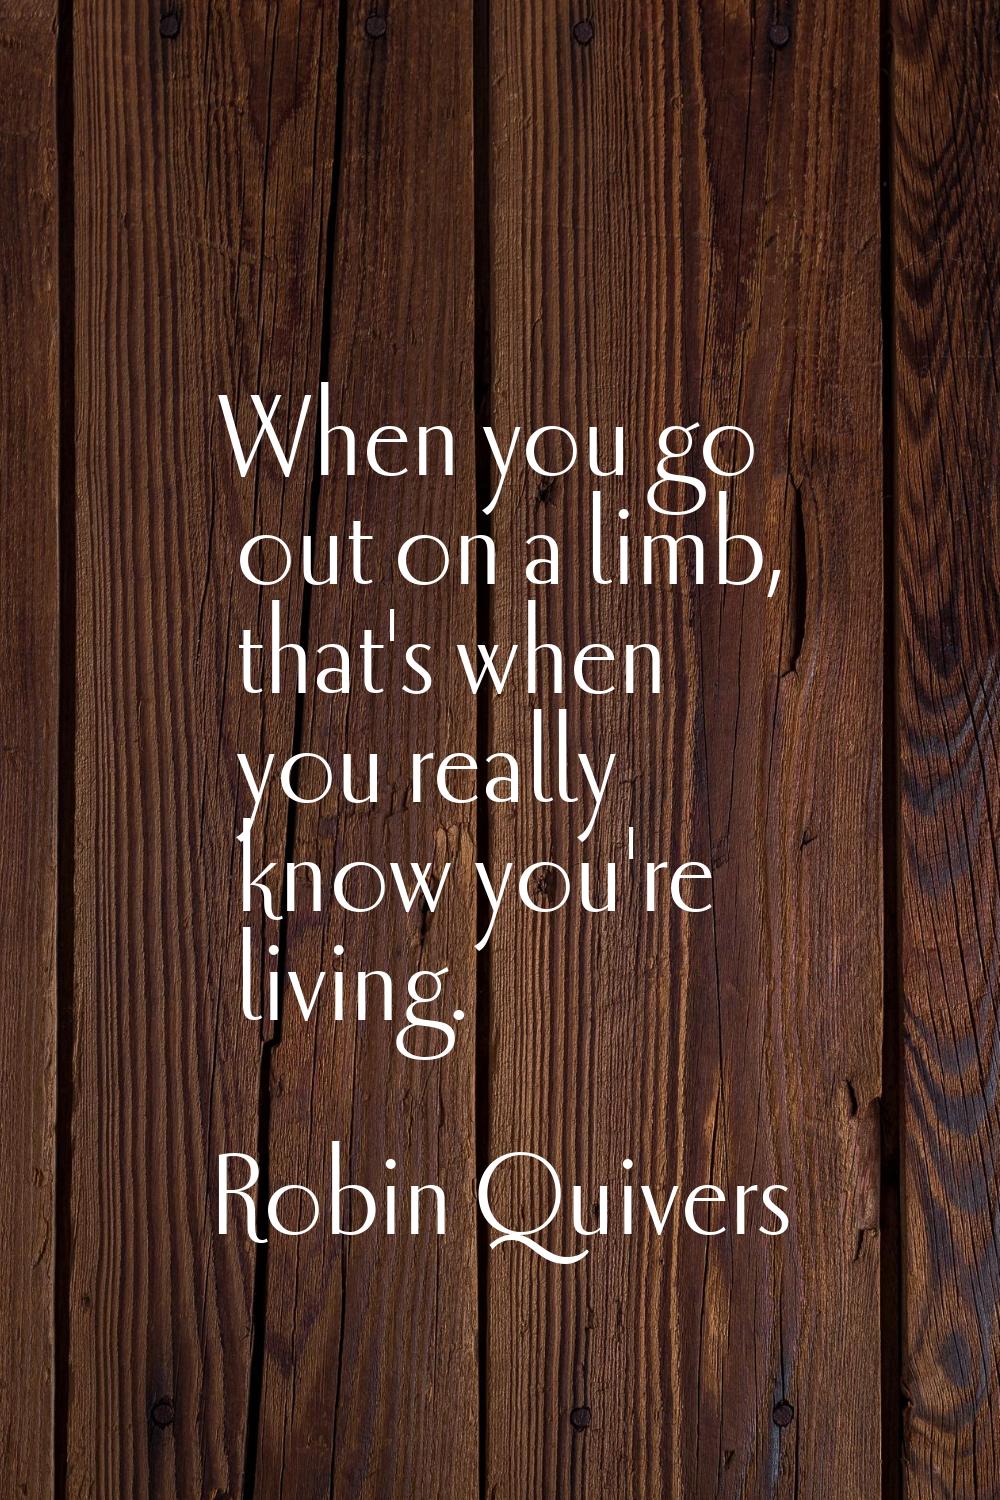 When you go out on a limb, that's when you really know you're living.